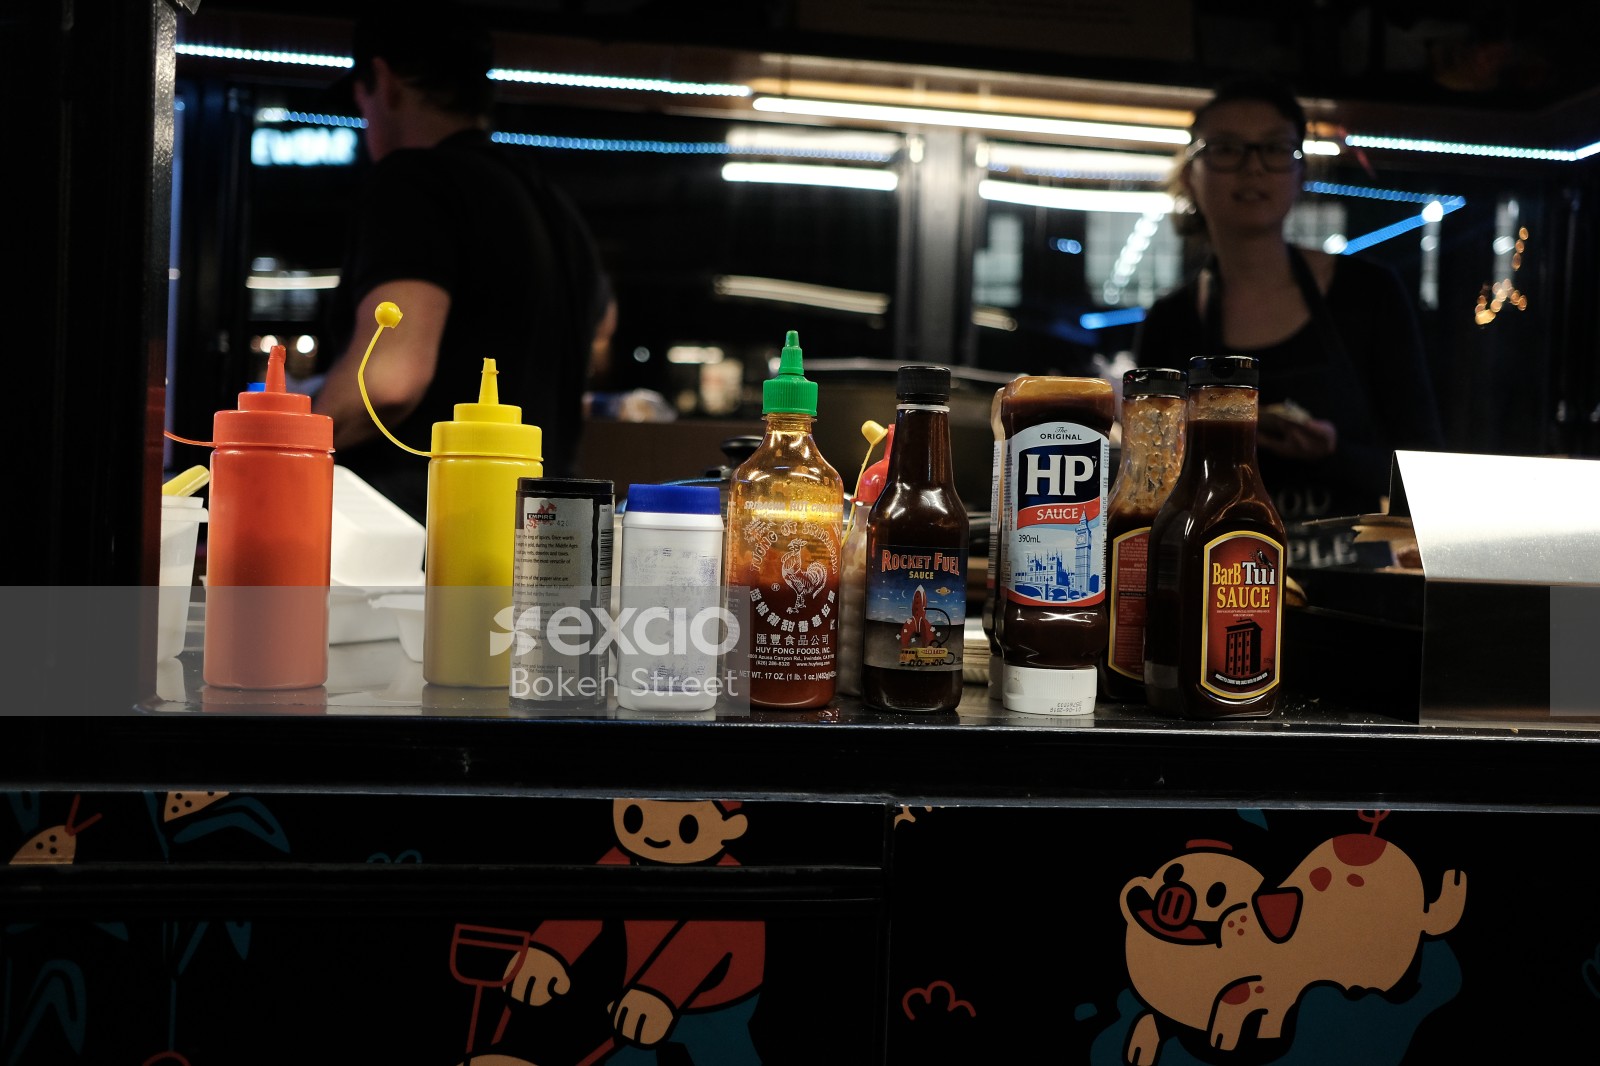 Condiments and sauces in the street food truck